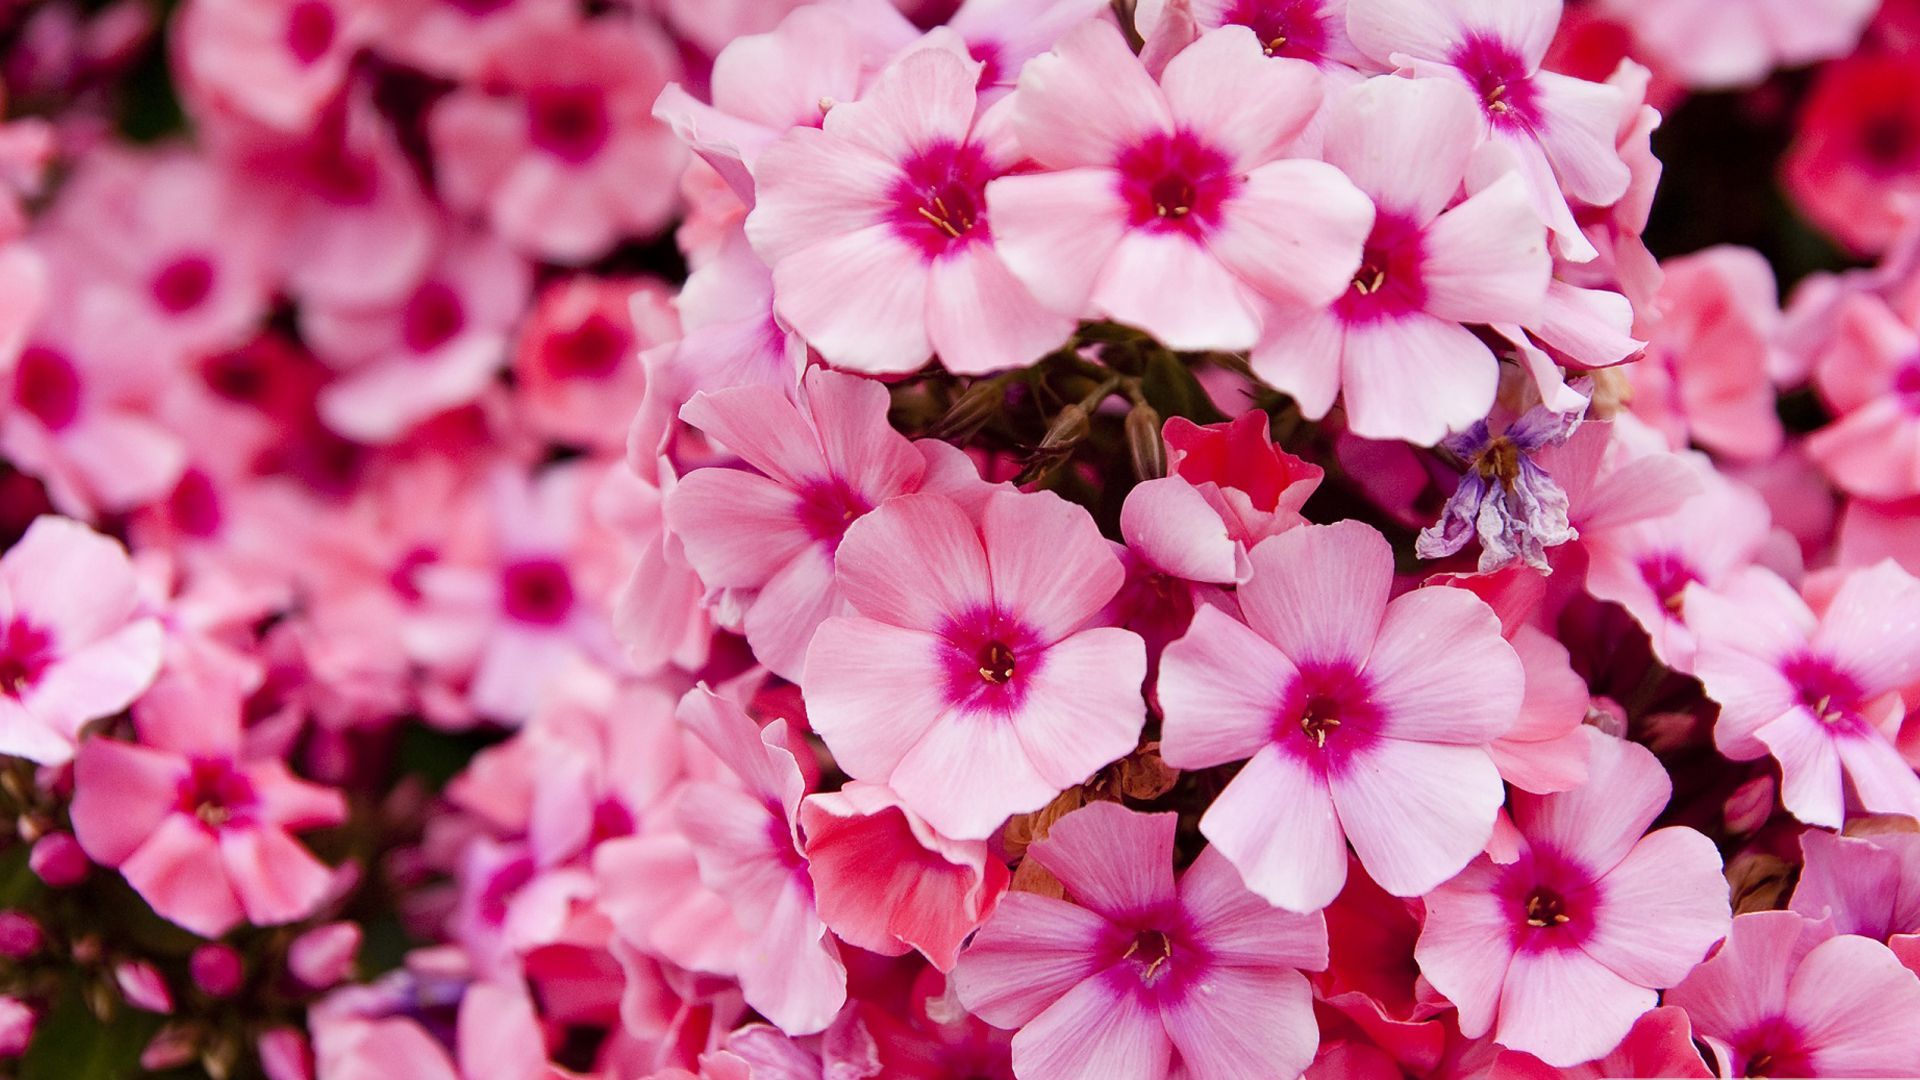 A close up of some pink flowers - Garden